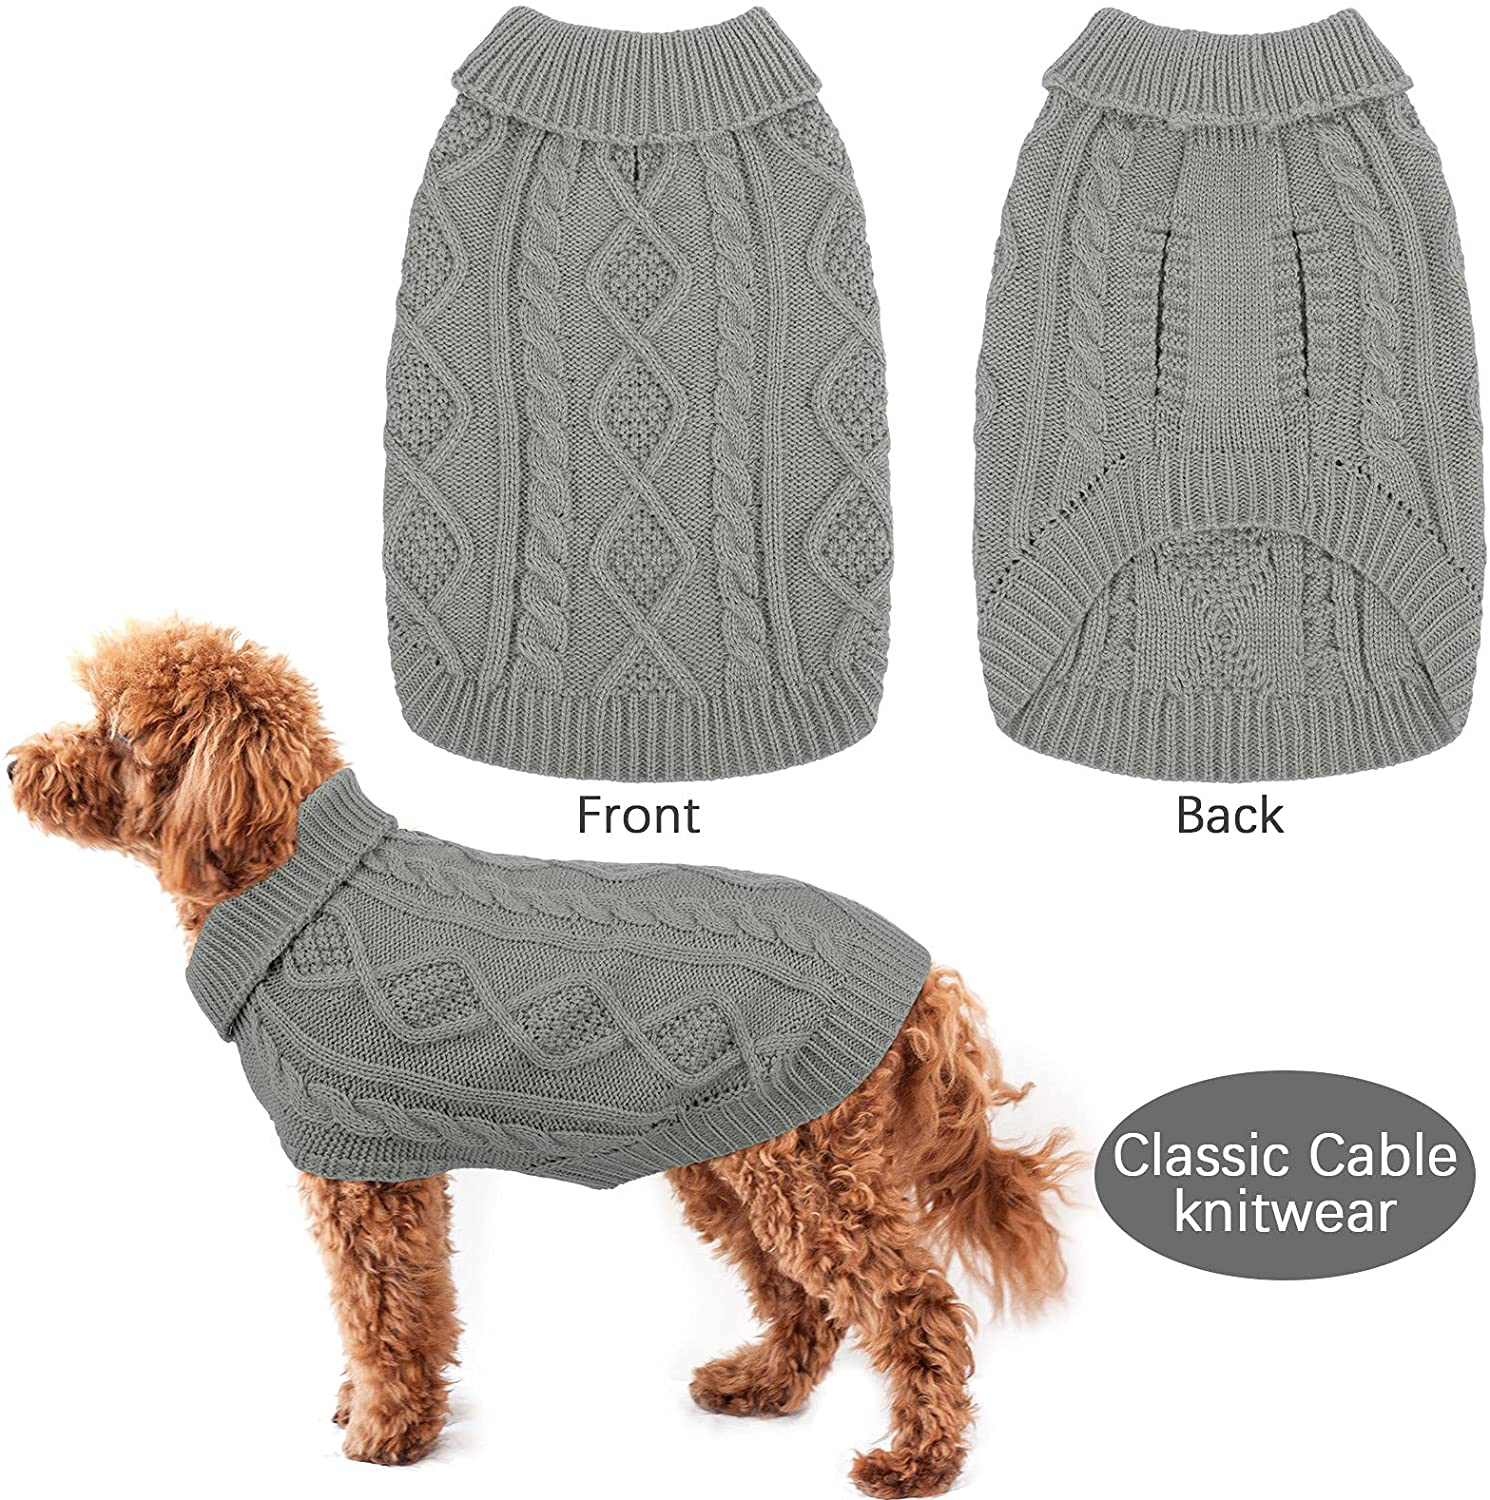 Pedgot Dog Sweater Turtleneck Knitted Dog Sweater Dog Jumper Coat Warm Pet Winter Clothes Classic Cable Knit Sweater for Dogs Cats in Cold Season Animals & Pet Supplies > Pet Supplies > Cat Supplies > Cat Apparel Pedgot   